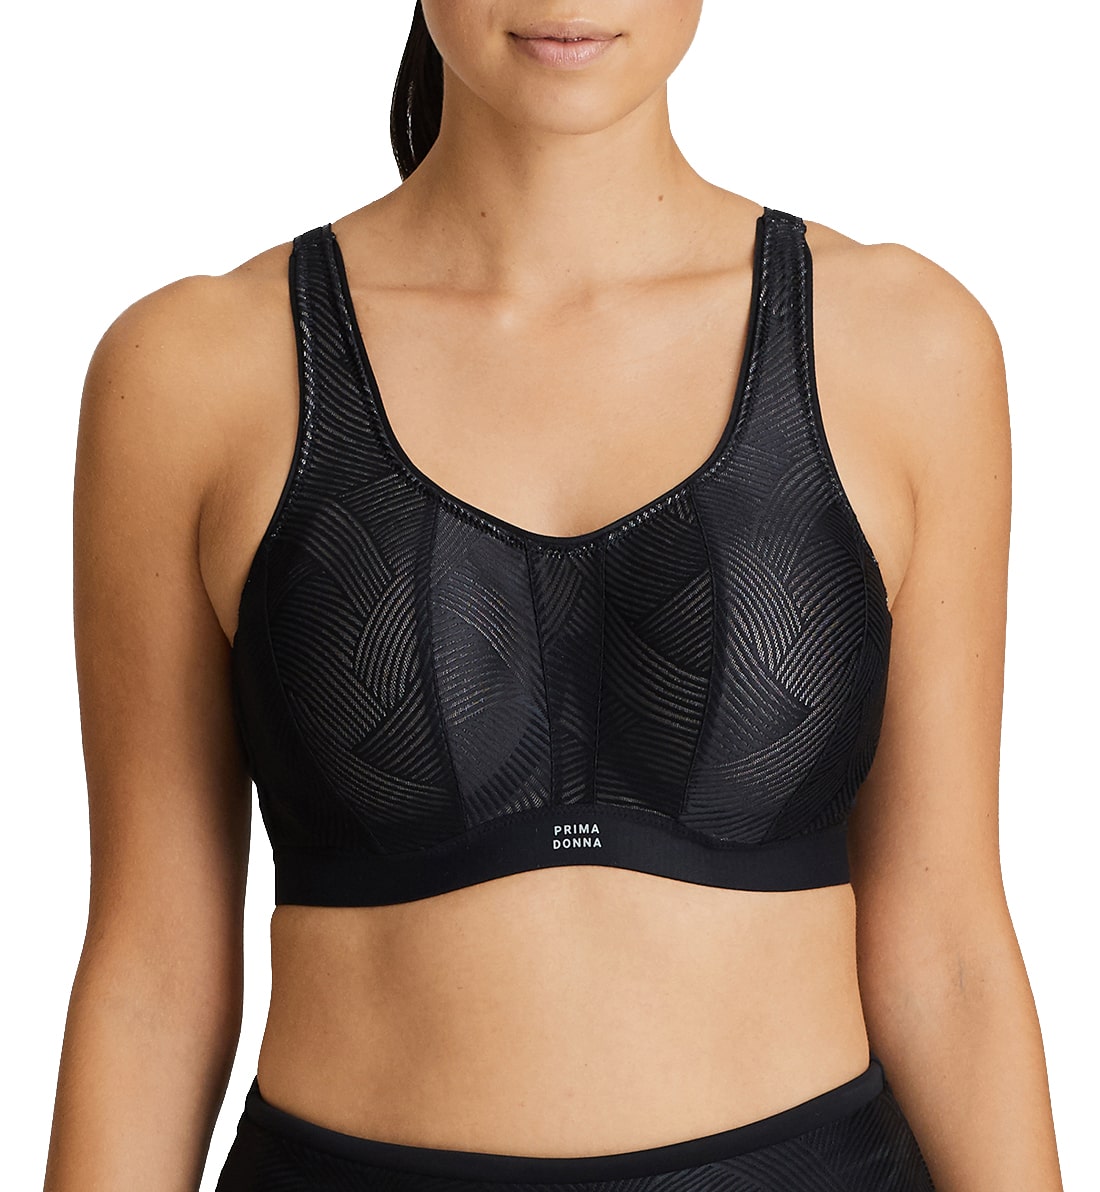 30F Bra Size in E Cup Sizes by Prima Donna Convertible and Sport Bras